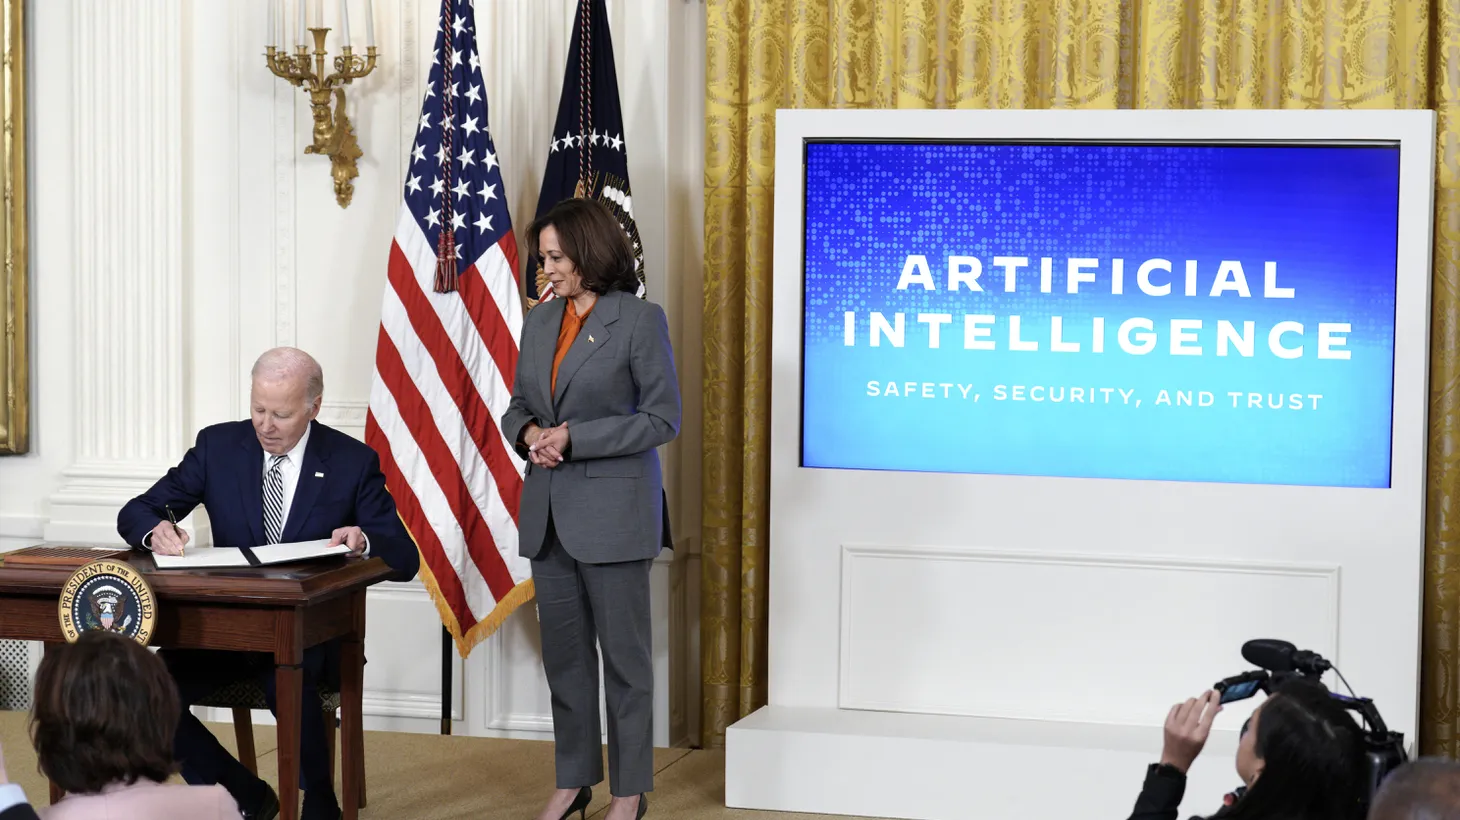 U.S. President Joe Biden, with Vice President Kamala Harris, signs an executive order during the artificial intelligence event at the White House on October 30, 2023.